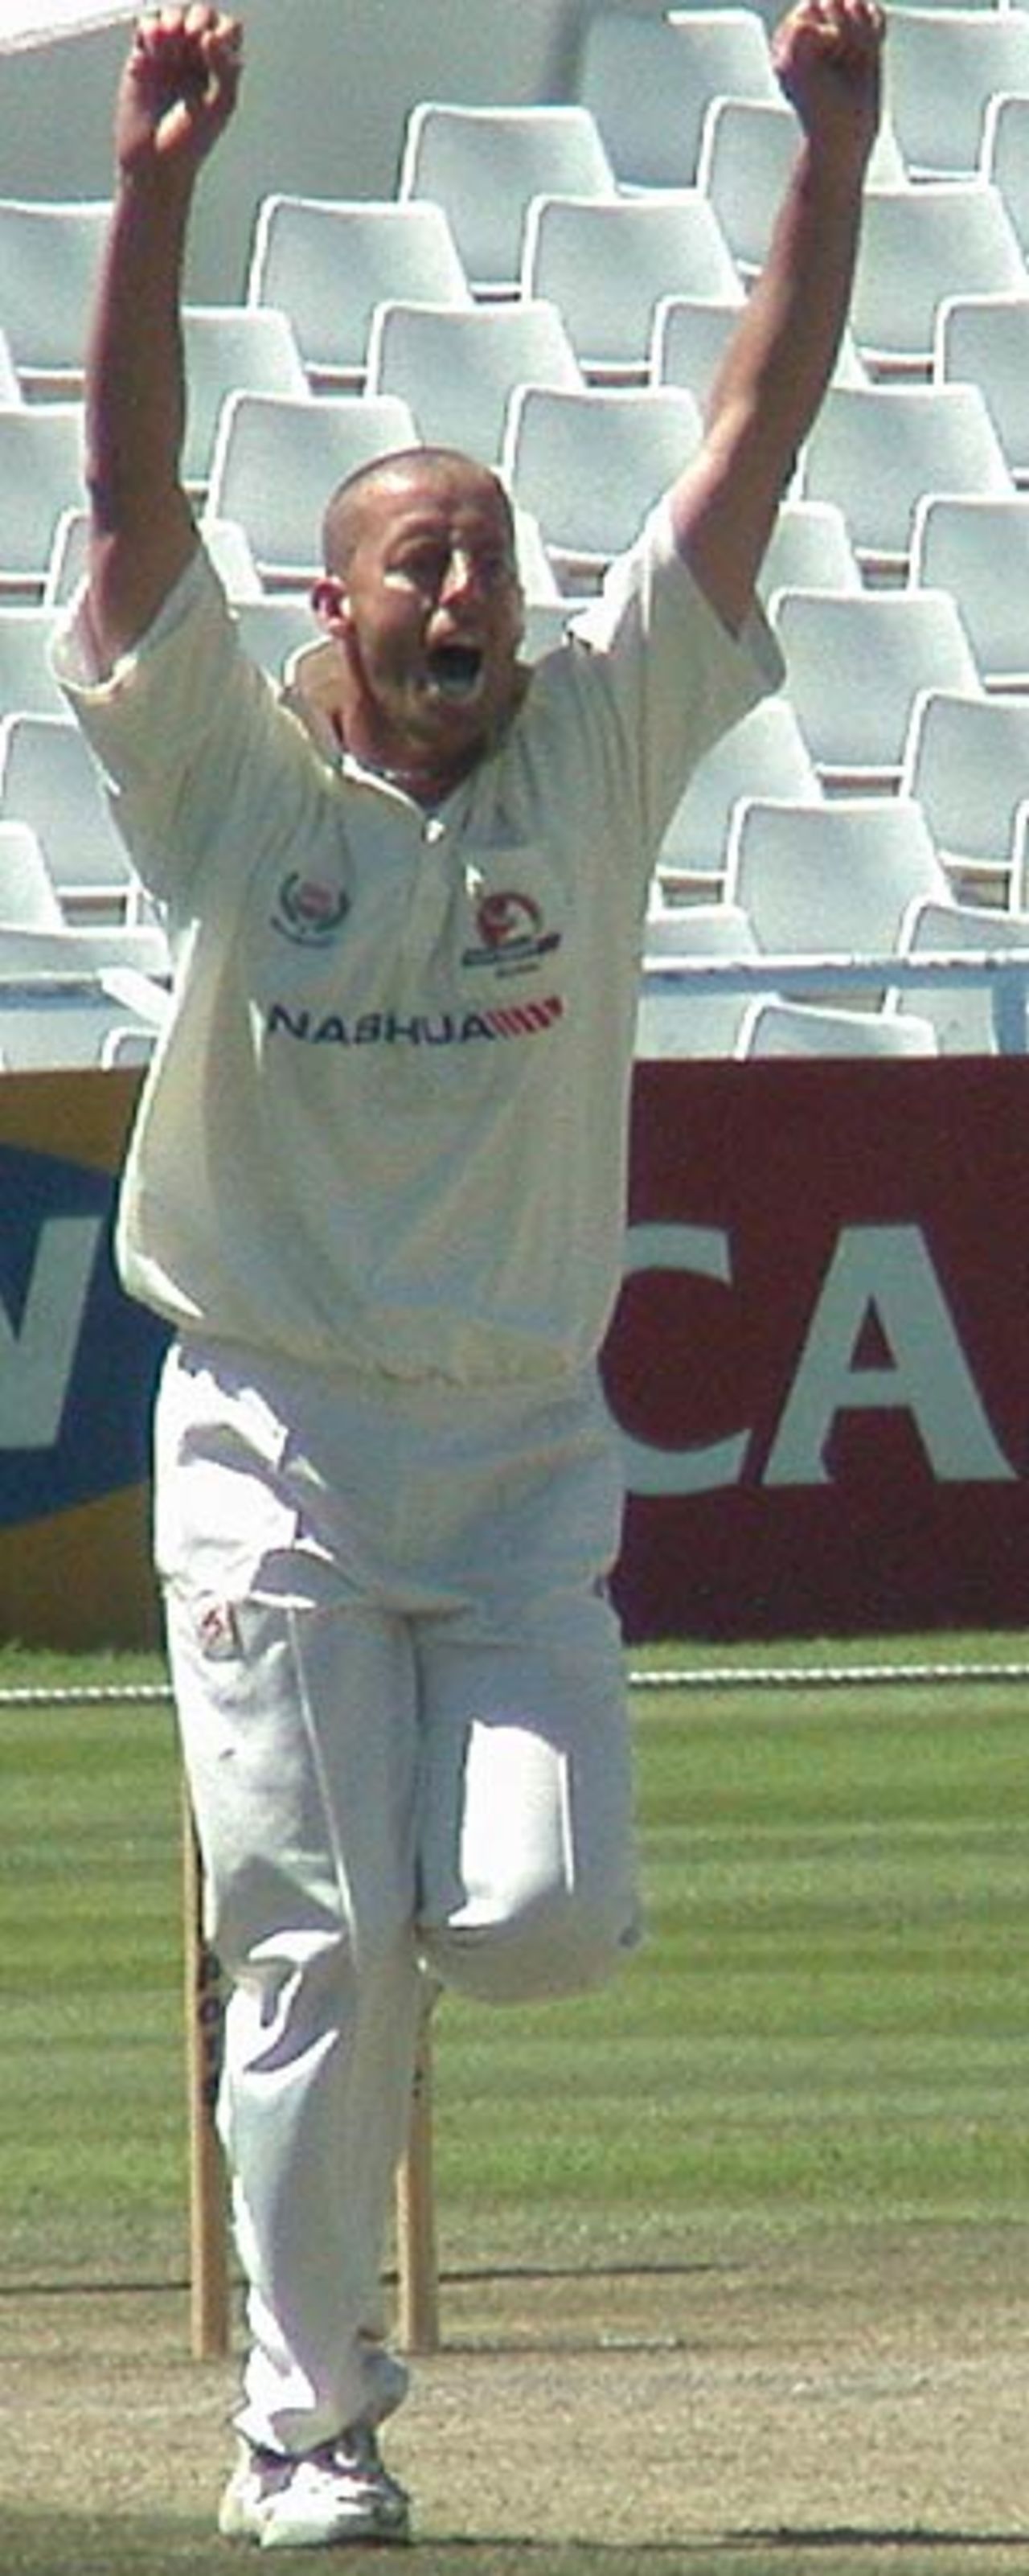 Charl Willoughby celebrates the far of another Easterns wicket